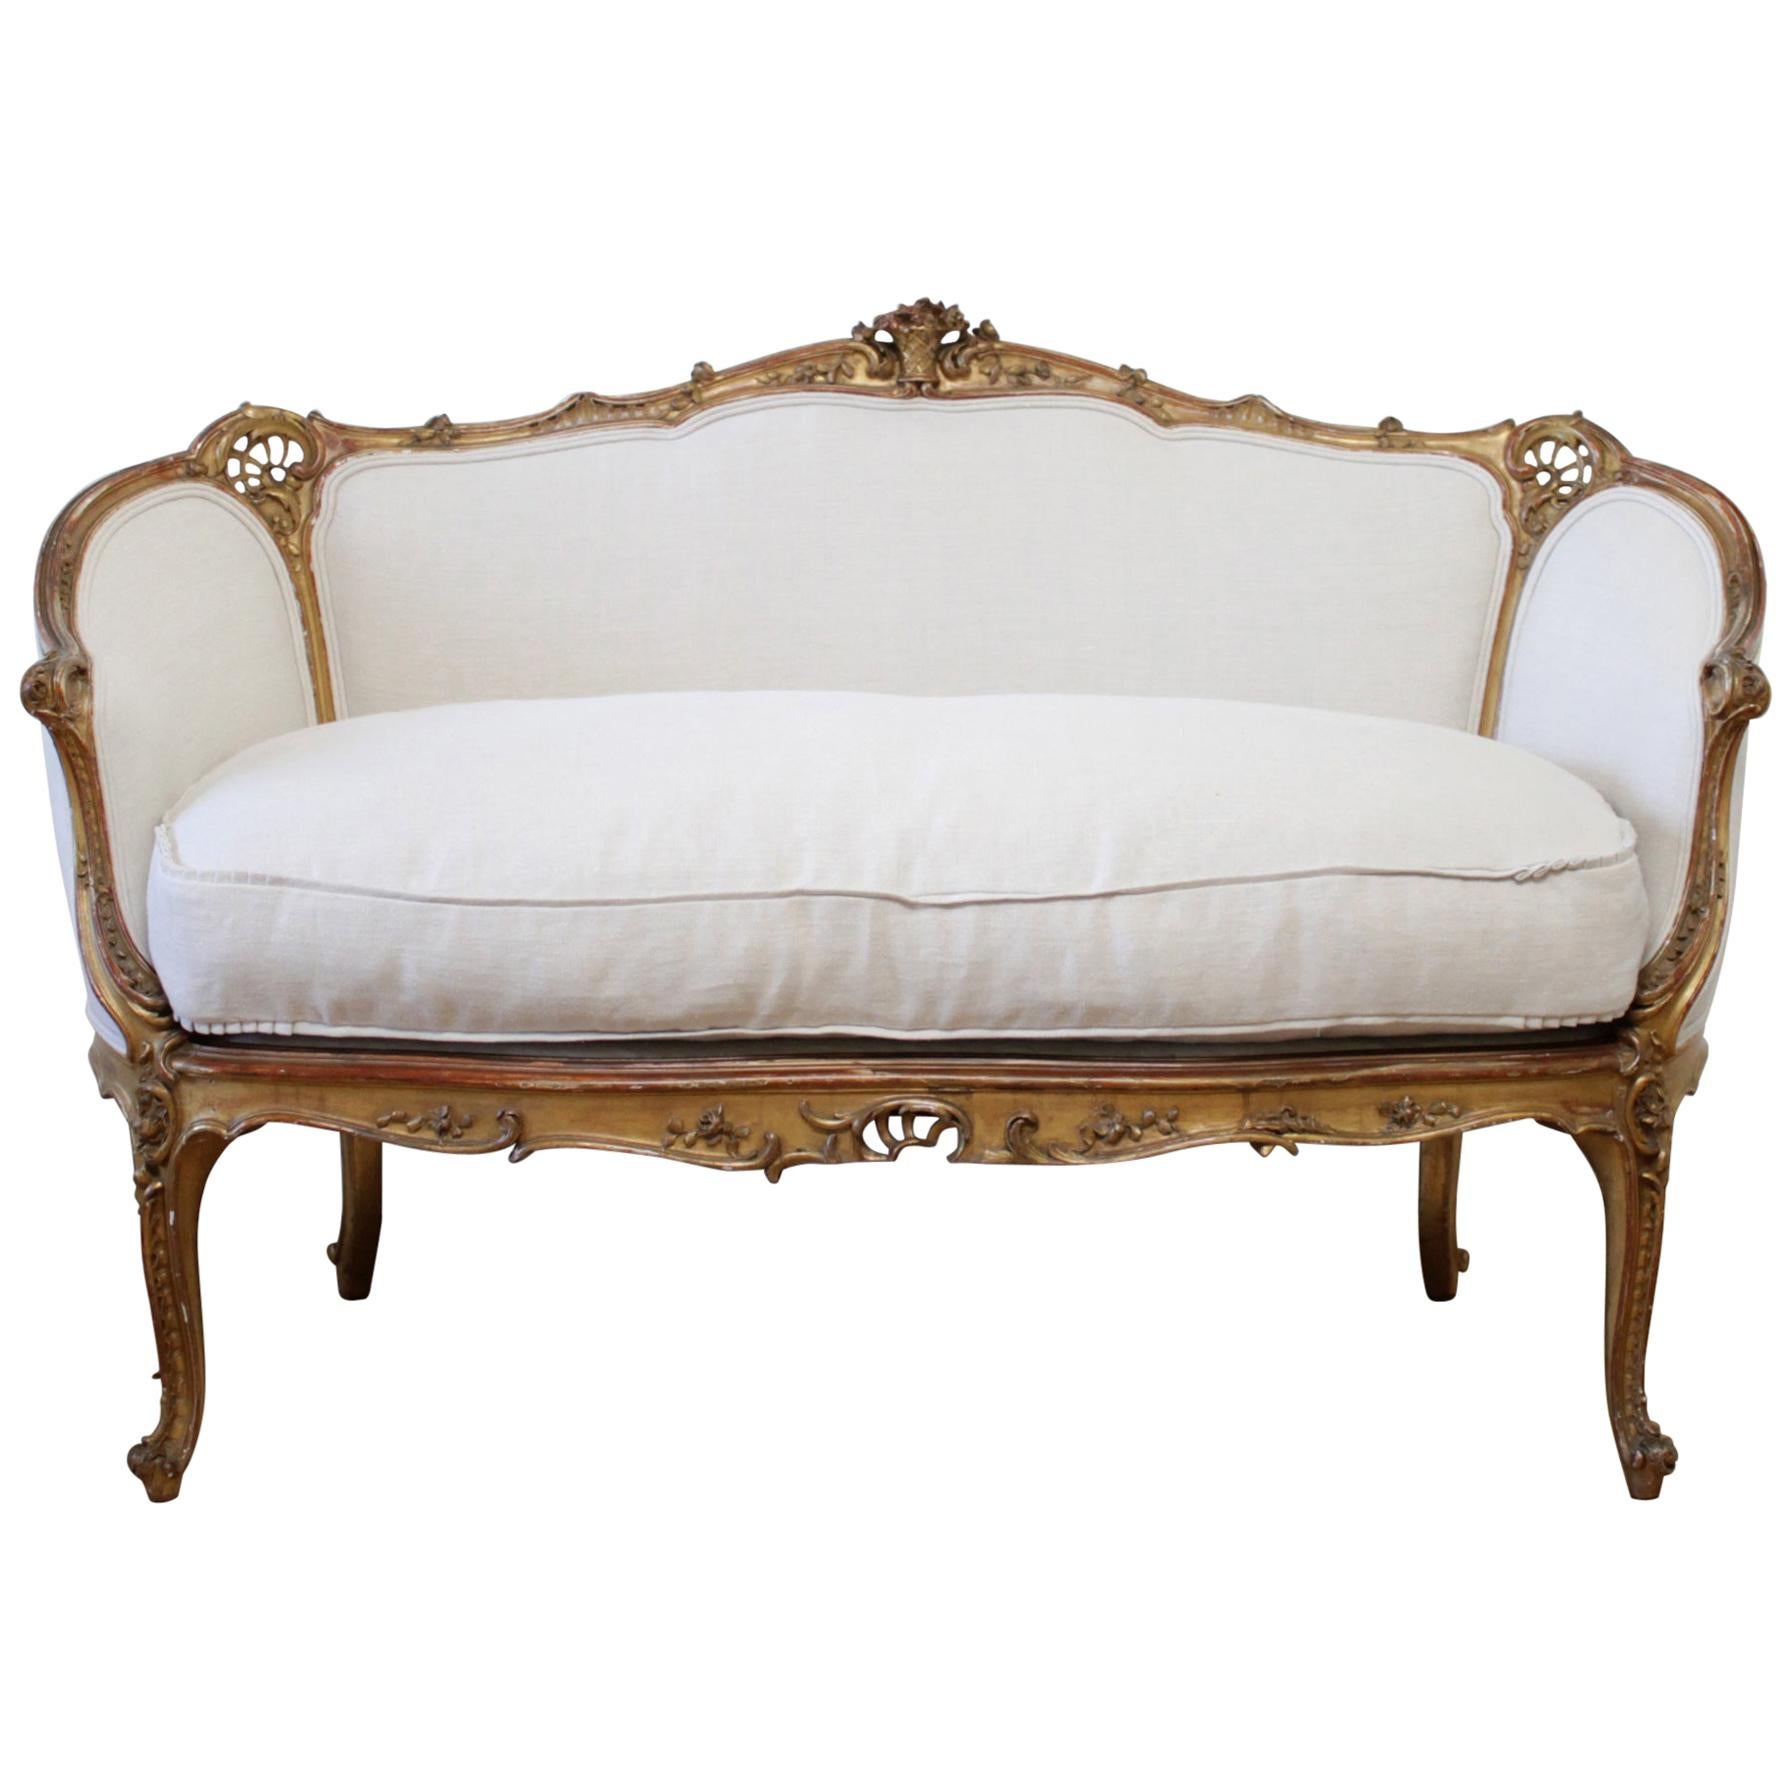 Antique French Louis XV Style Giltwood Settee with Linen Slip Cover Down Cushion